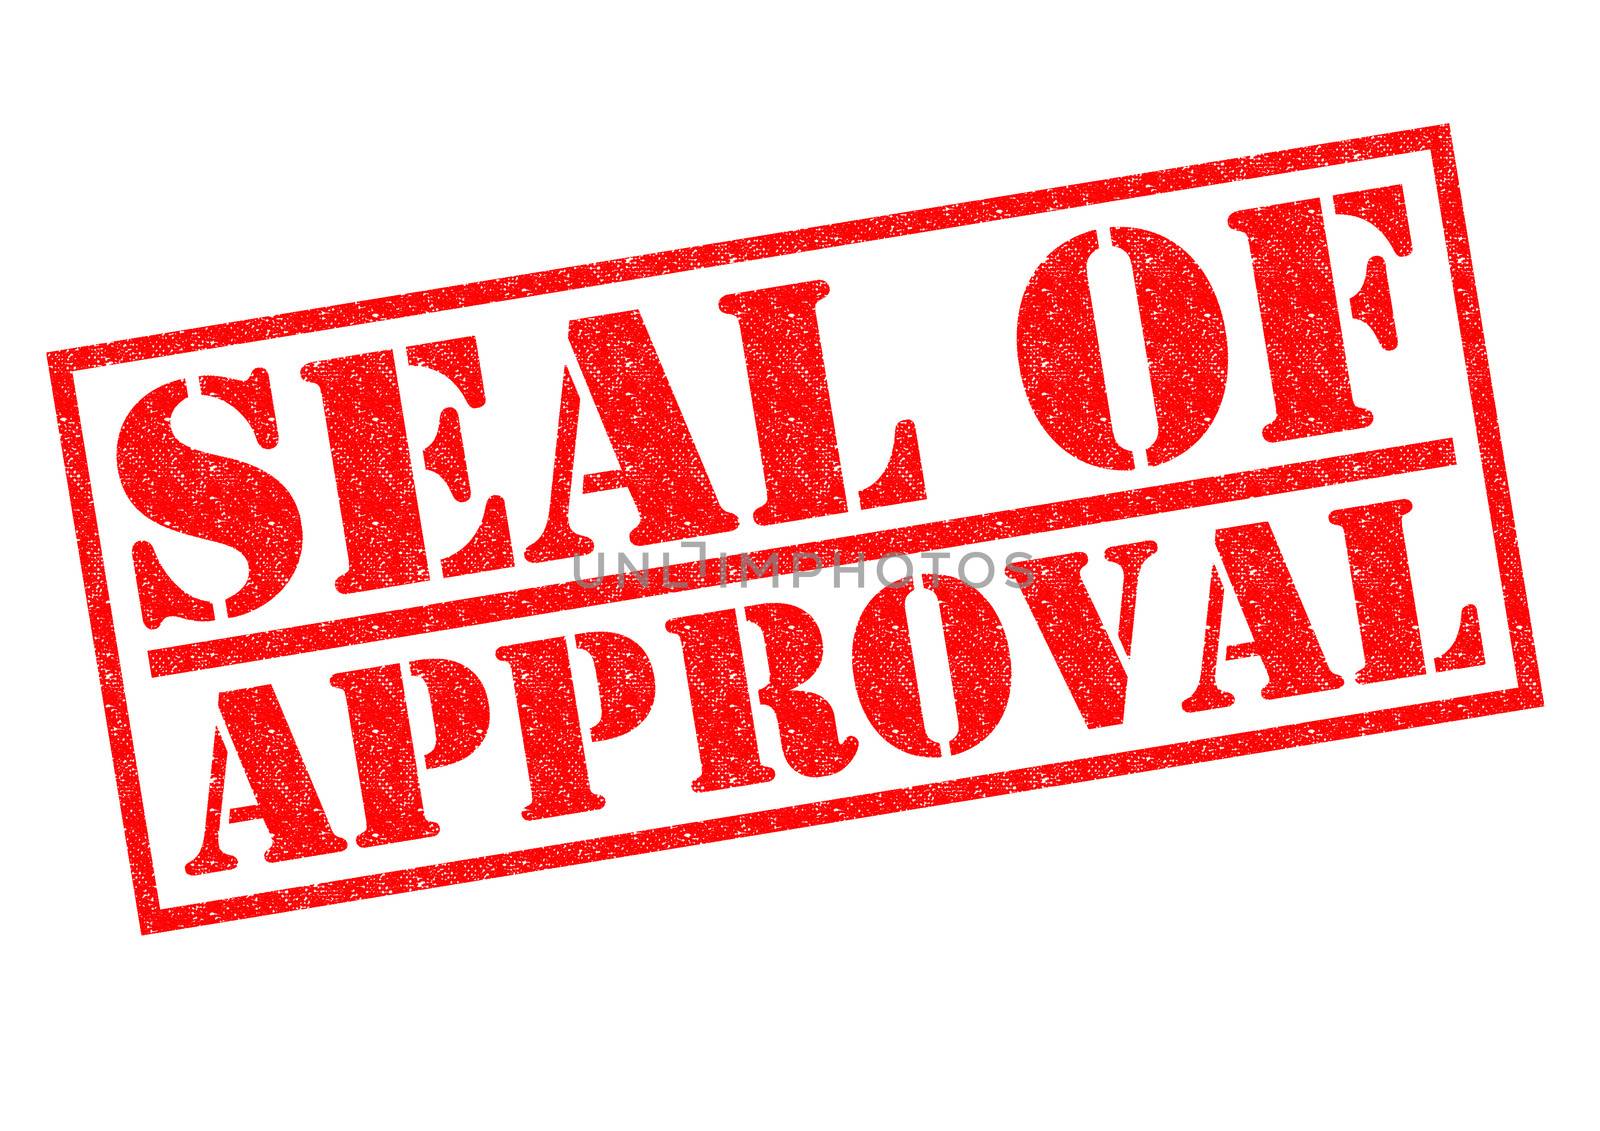 SEAL OF APPROVAL re Rubber Stamp over a white background.